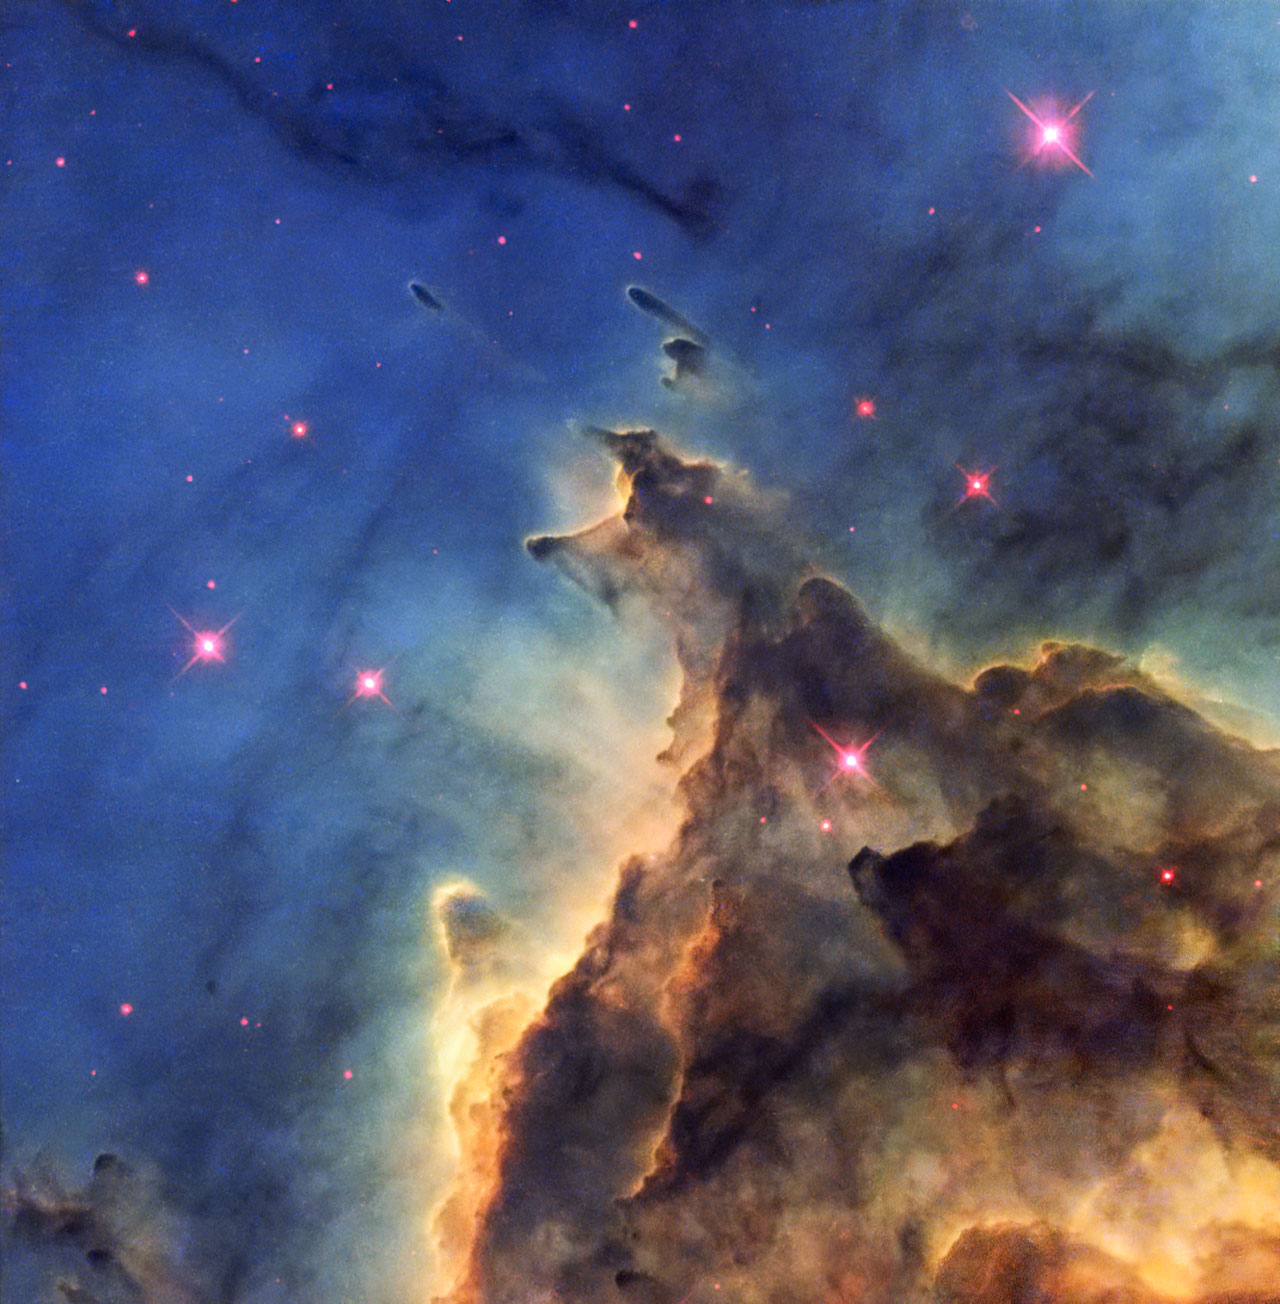 The NASA/ESA Hubble Space Telescope has imaged a violent stellar nursery called NGC 2174, in which stars are born in a first-come-first-served feeding frenzy for survival. The problem is that star formation is a very inefficient process; most of the ingredients to make stars are wasted as the cloud of gas and dust, or nebula, gradually disperses. In NGC 2174, the rate at which the nebula disperses is further speeded up by the presence of hot young stars, which create high velocity winds that blow the gas outwards. These fiery youngsters also bombard the surrounding gas with intense radiation, making it glow brightly, creating the brilliant scene captured here. The nebula is mostly composed of hydrogen gas, which is ionised by the ultraviolet radiation emitted by the hot stars, leading to the nebula’s alternative title as an HII region. This picture shows only part of the nebula, where dark dust clouds are strikingly silhouetted against the glowing gas. NGC 2174 lies about 6400 light-years away in the constellation of Orion (The Hunter). It is not part of the much more familiar Orion Nebula, which lies much closer to us. Despite its prime position in a very familiar constellation this nebula is faint and had to wait until 1877 for its discovery by the French astronomer Jean Marie Edouard Stephan using an 80 cm reflecting telescope at the Observatoire de Marseille. This picture was created from images from the Wide Field Planetary Camera 2 on Hubble. Images through four different filters were combined to make the view shown here. Images through a filter isolating the glow from ionised oxygen (F502N) were coloured blue and images through a filter showing glowing hydrogen (F656N) are green. Glowing ionised sulphur (F673N) and the view through a near-infrared filter (F814W) are both coloured red. The total exposure times per filter were 2600 s, 2600 s, 2600 s and 1000 s  respectively and the field of view is about 1.8 arcminutes across.